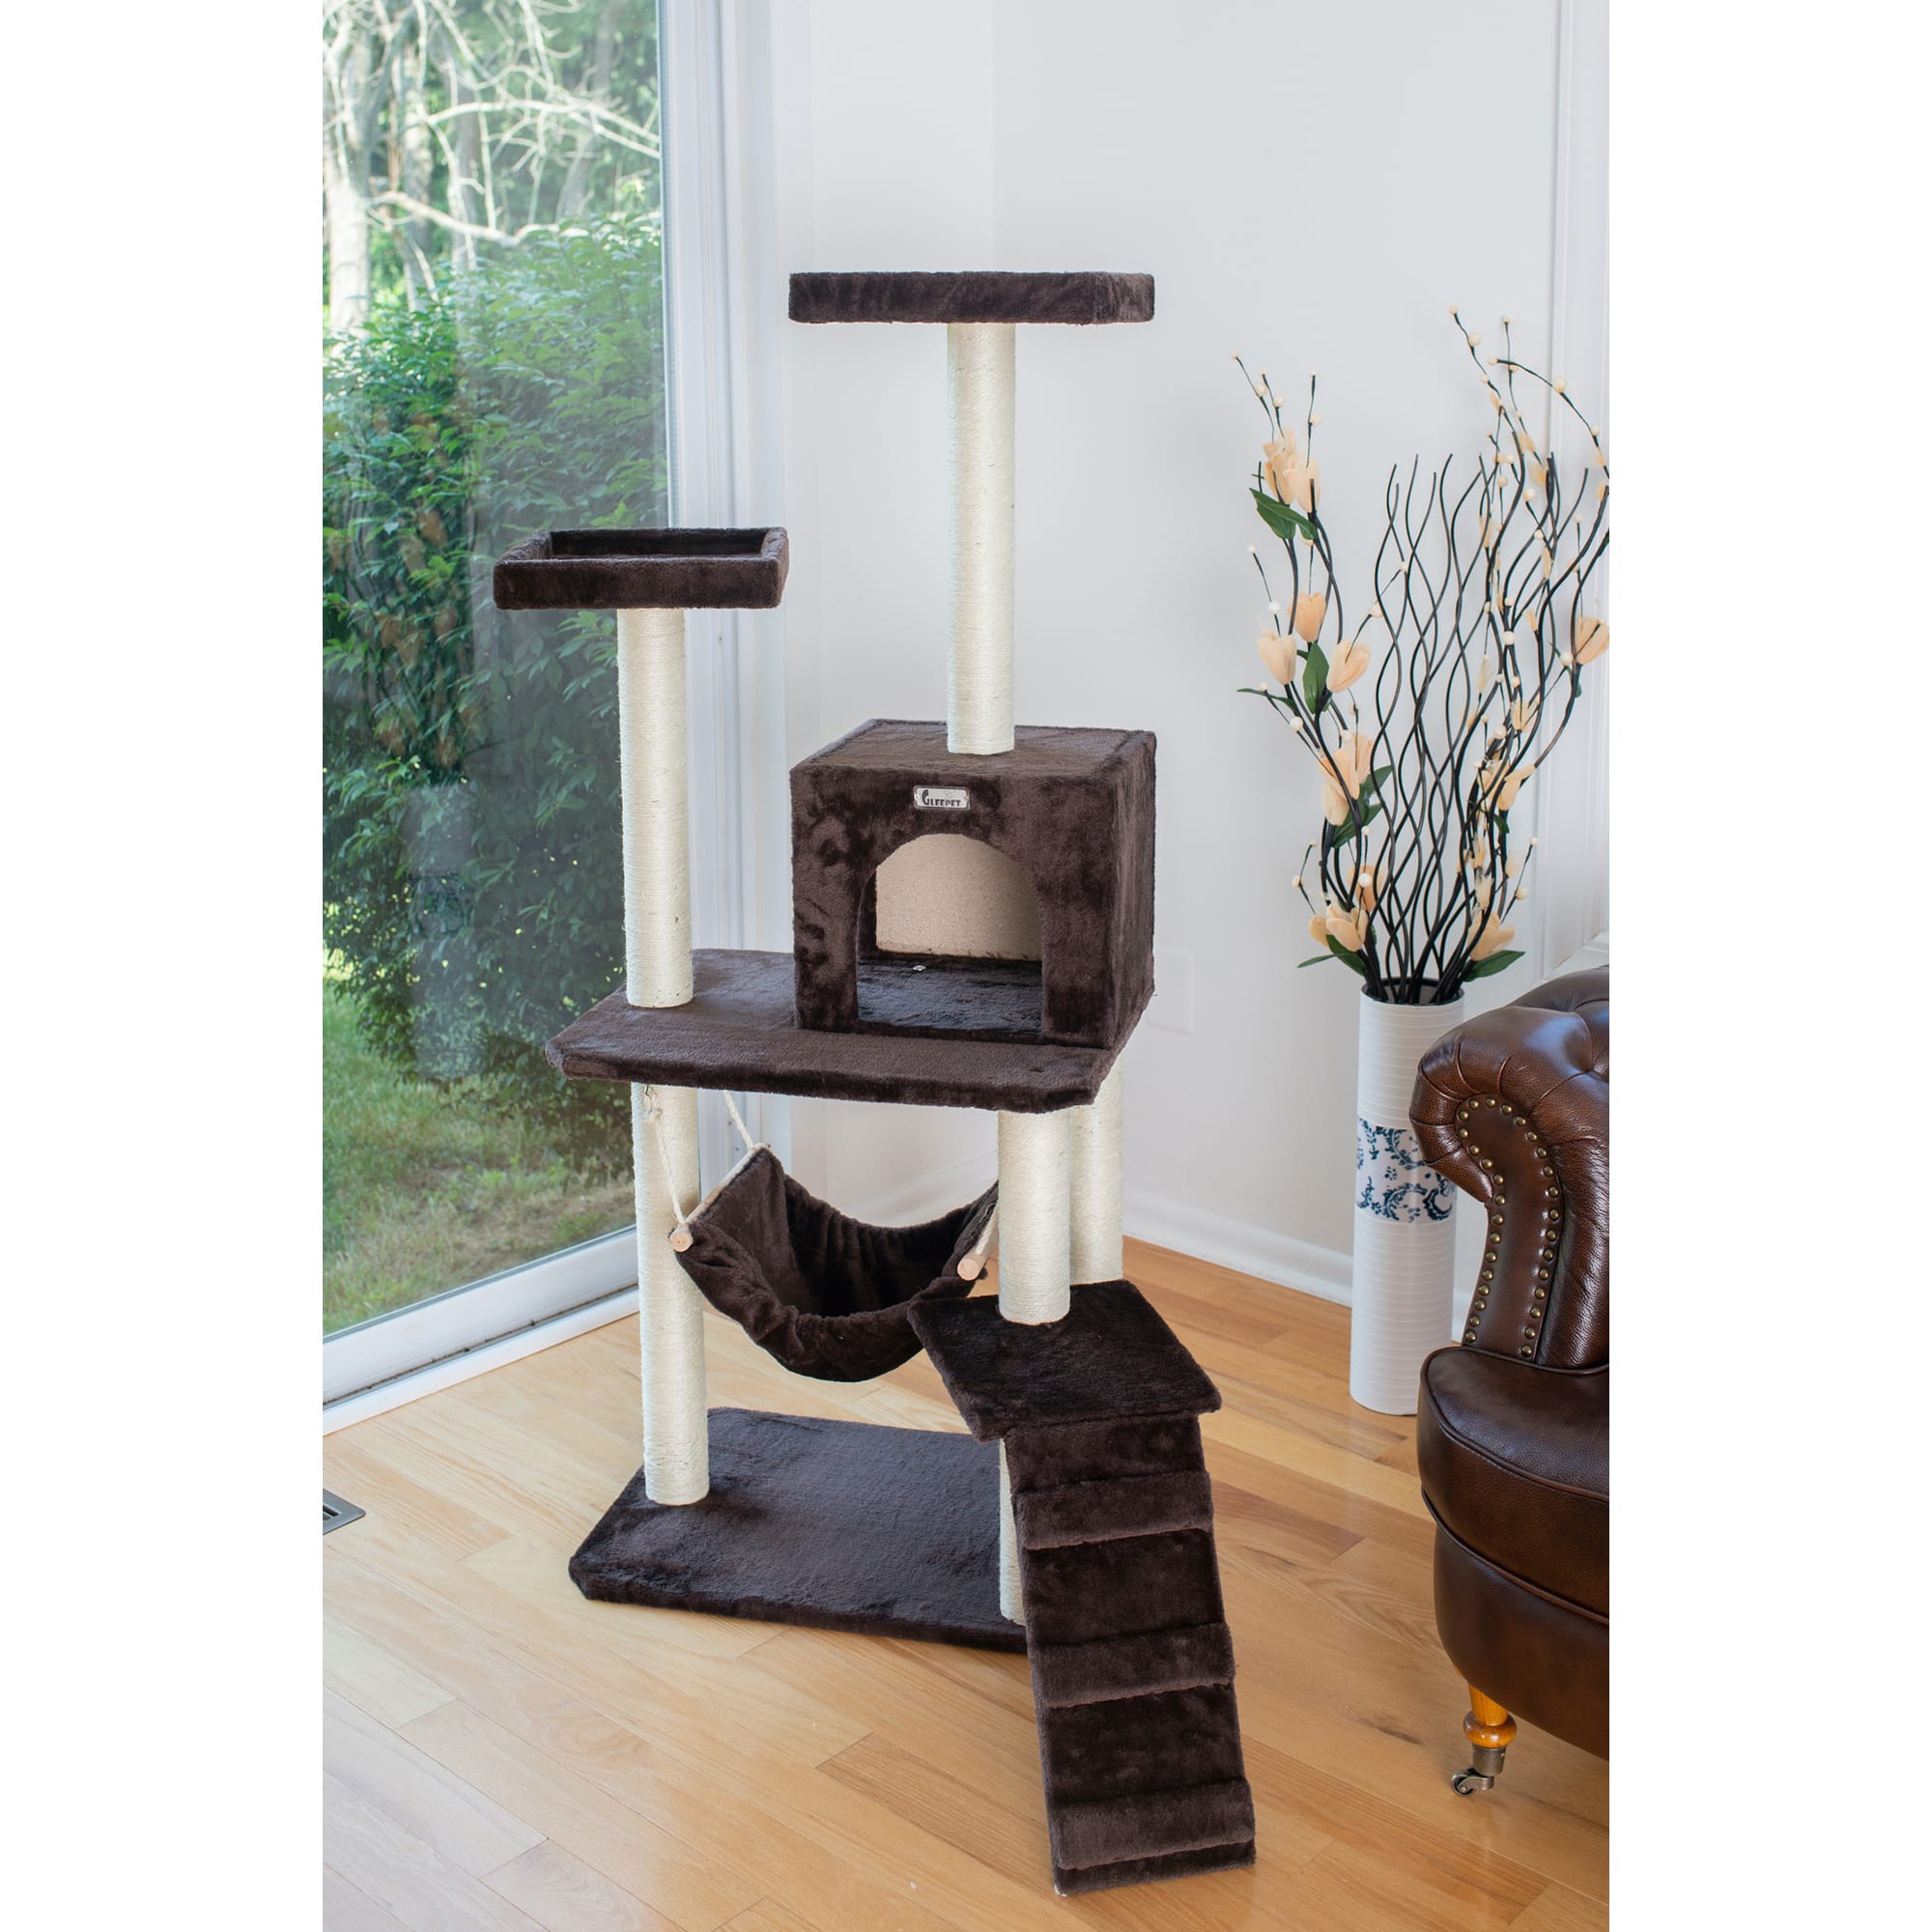 Gleepet Coffee Brown With Four Levels, Ramp, Hammock and Condo Real Wood Cat Tree